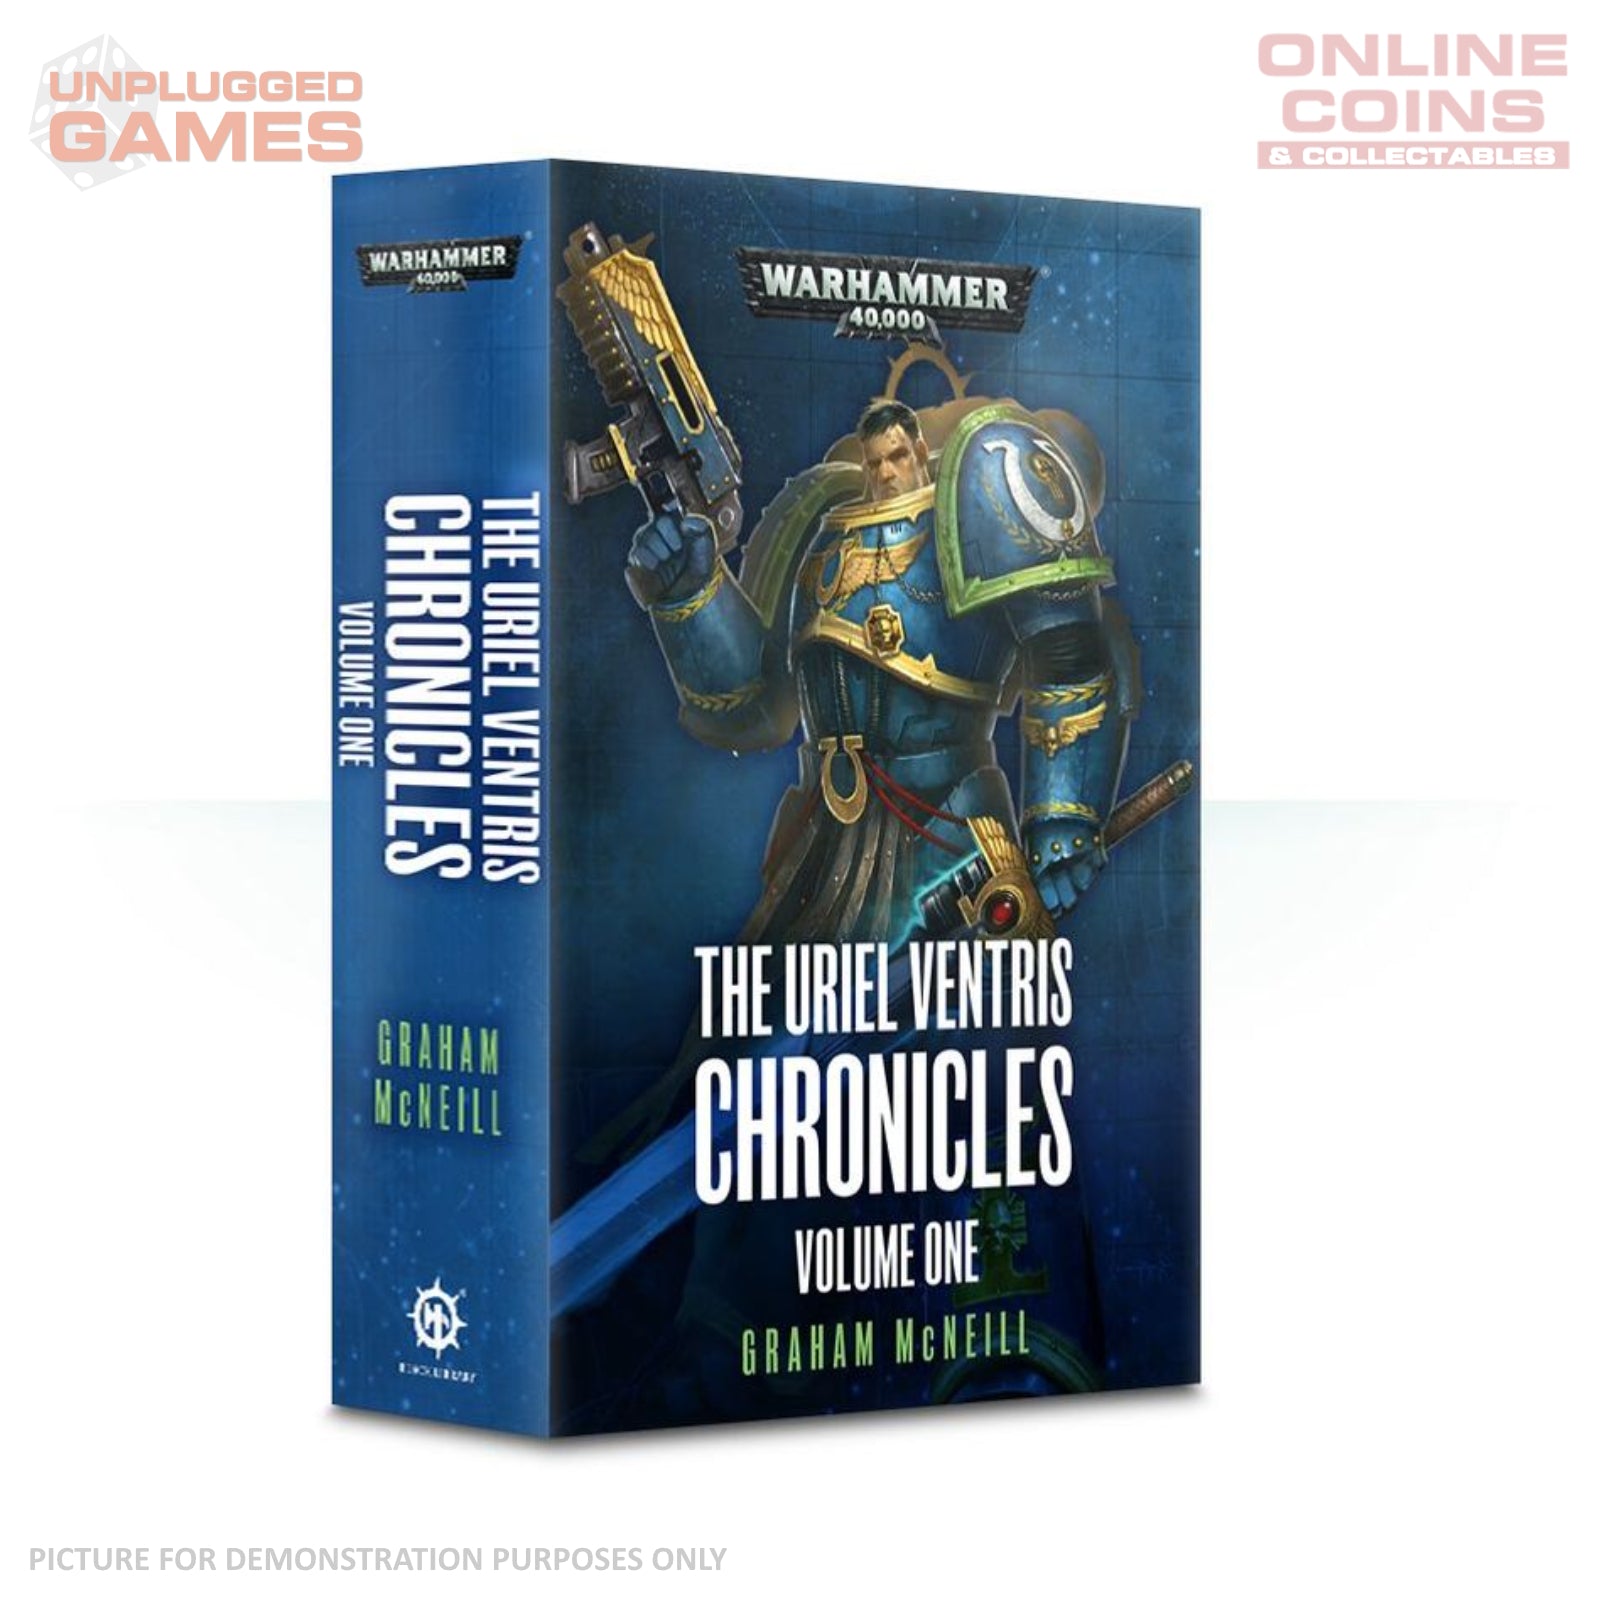 Warhammer 40,000 - The Uriel Ventris Chronicles Volume One